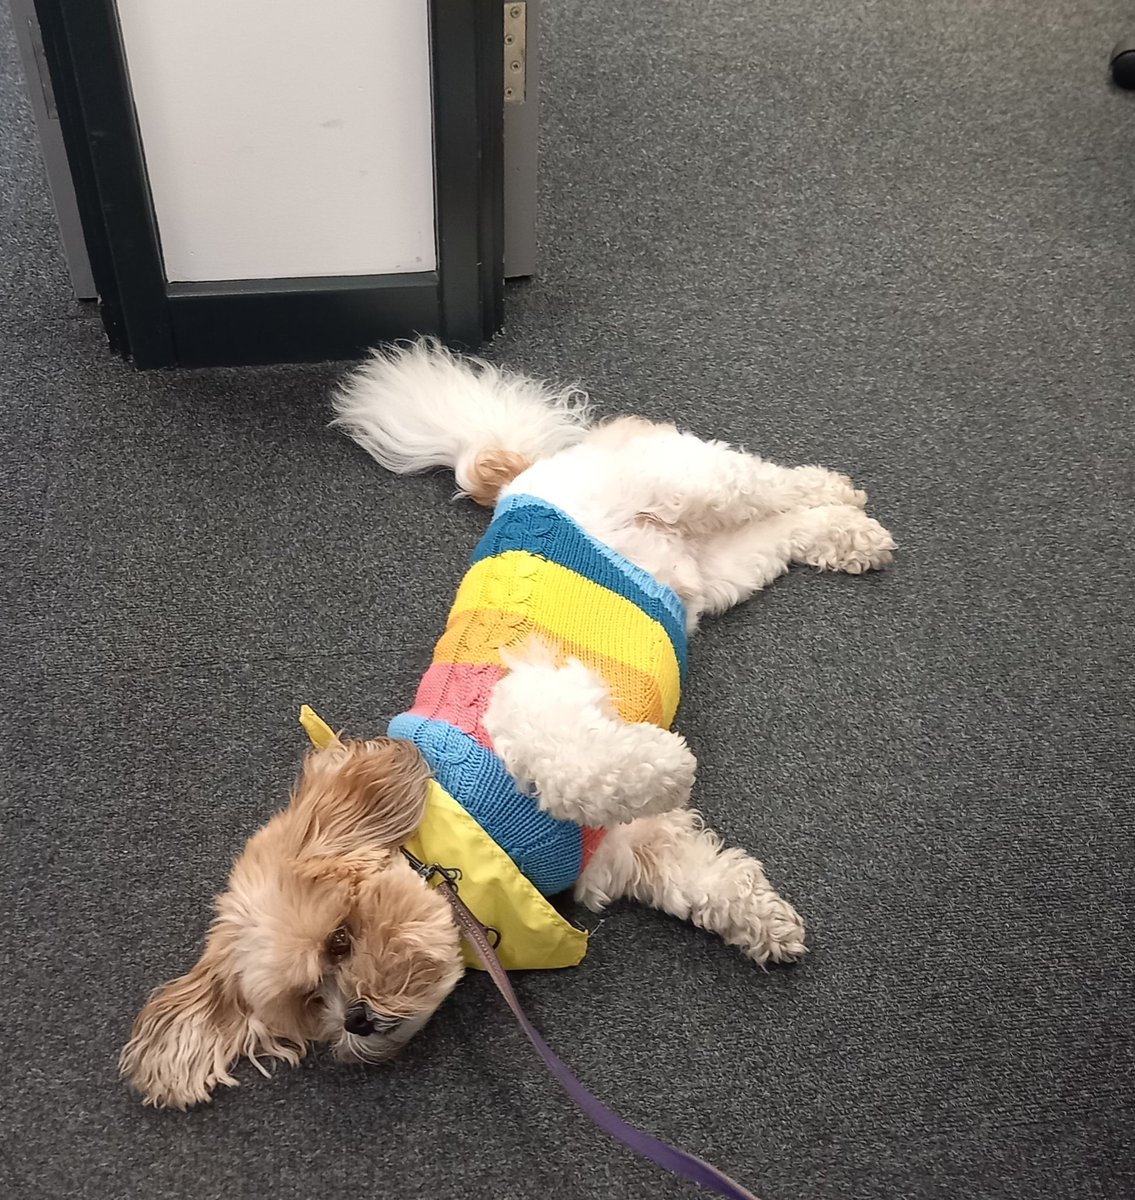 After a successful interview (on his terms of course) we have a new employee in our CQI team @croydonhealth meet Archie with thanks to avni sualy and @DoveyAndy who will be helping us improve staff wellbeing and joy at work